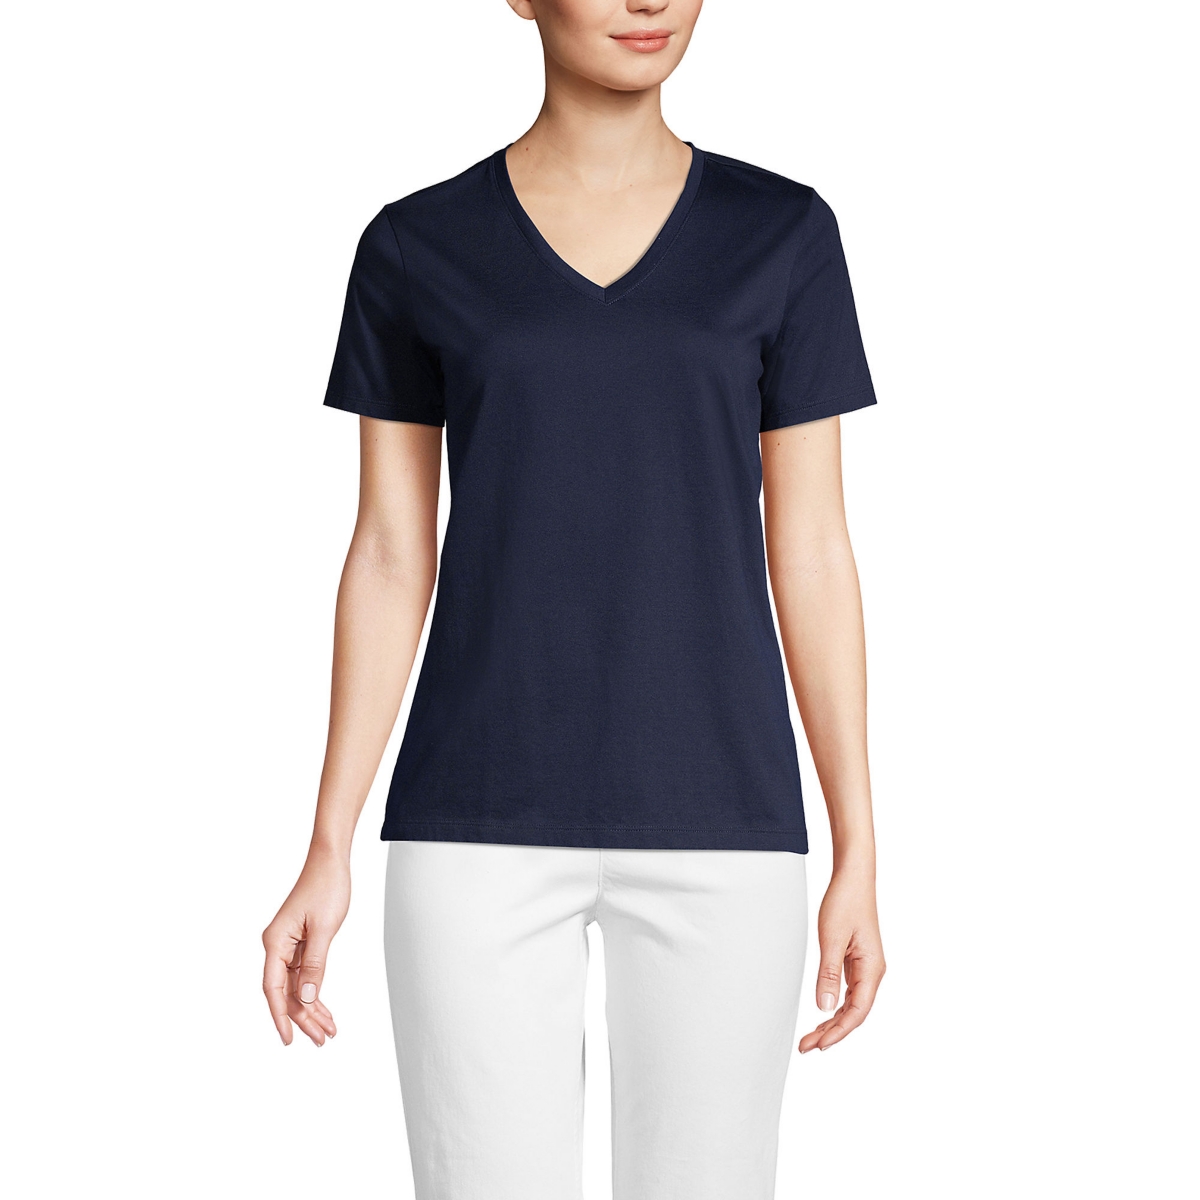 Women's Relaxed Supima Cotton T-Shirt - Radiant navy